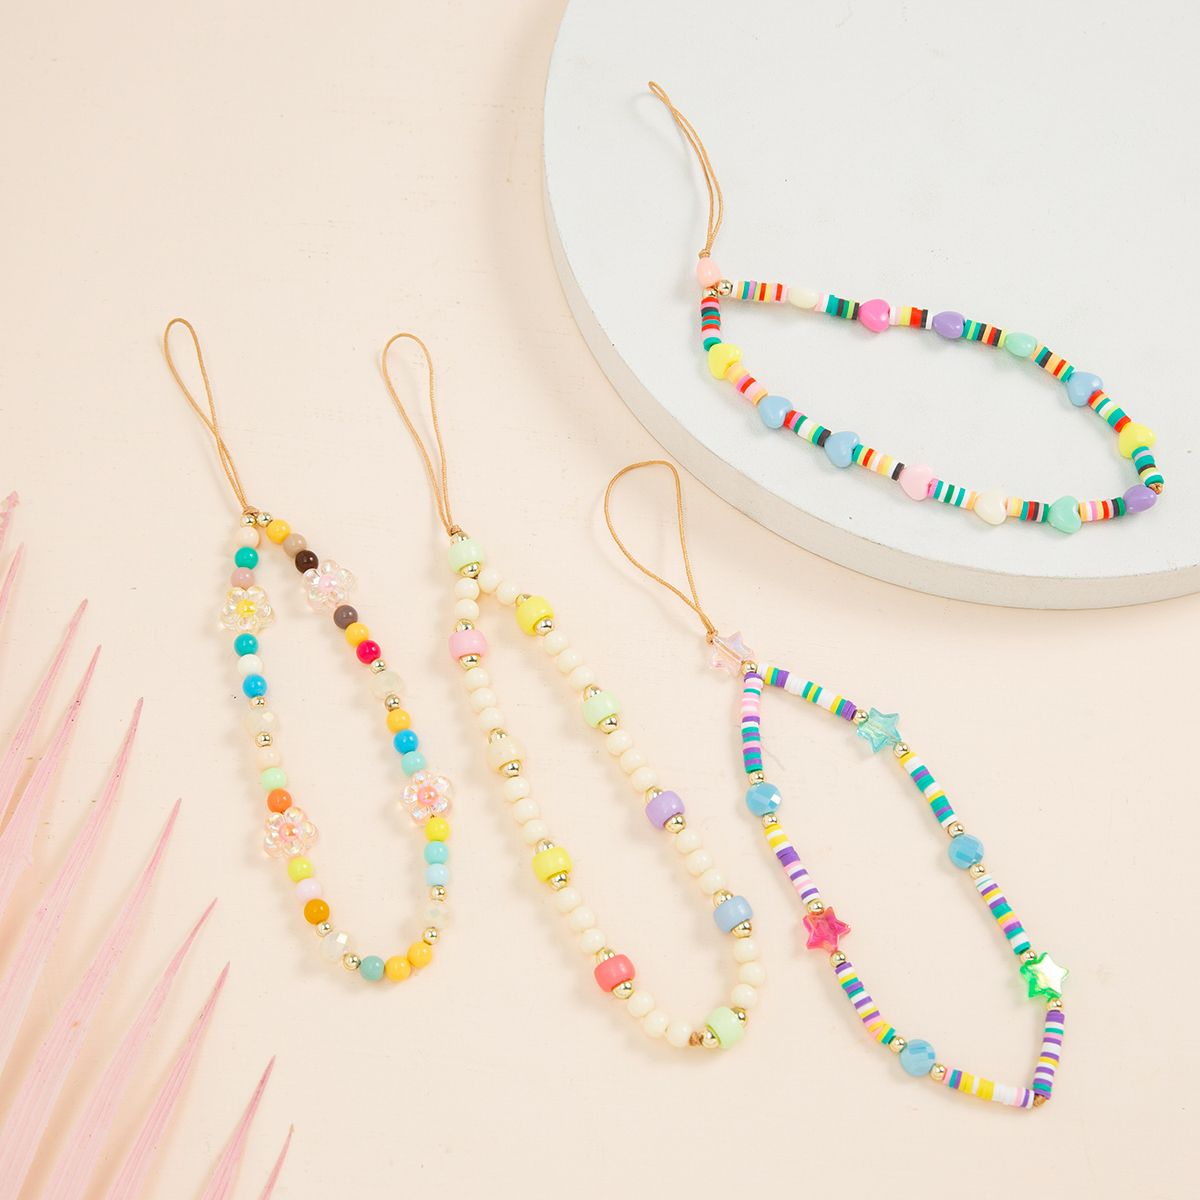 GONGRUOQIUSHAN New Colorful Anti-Lost Acrylic Bead Phone Chain Cell Phone Case Hanging Cord Mobile Phone Strap Lanyard Soft Pottery Rope